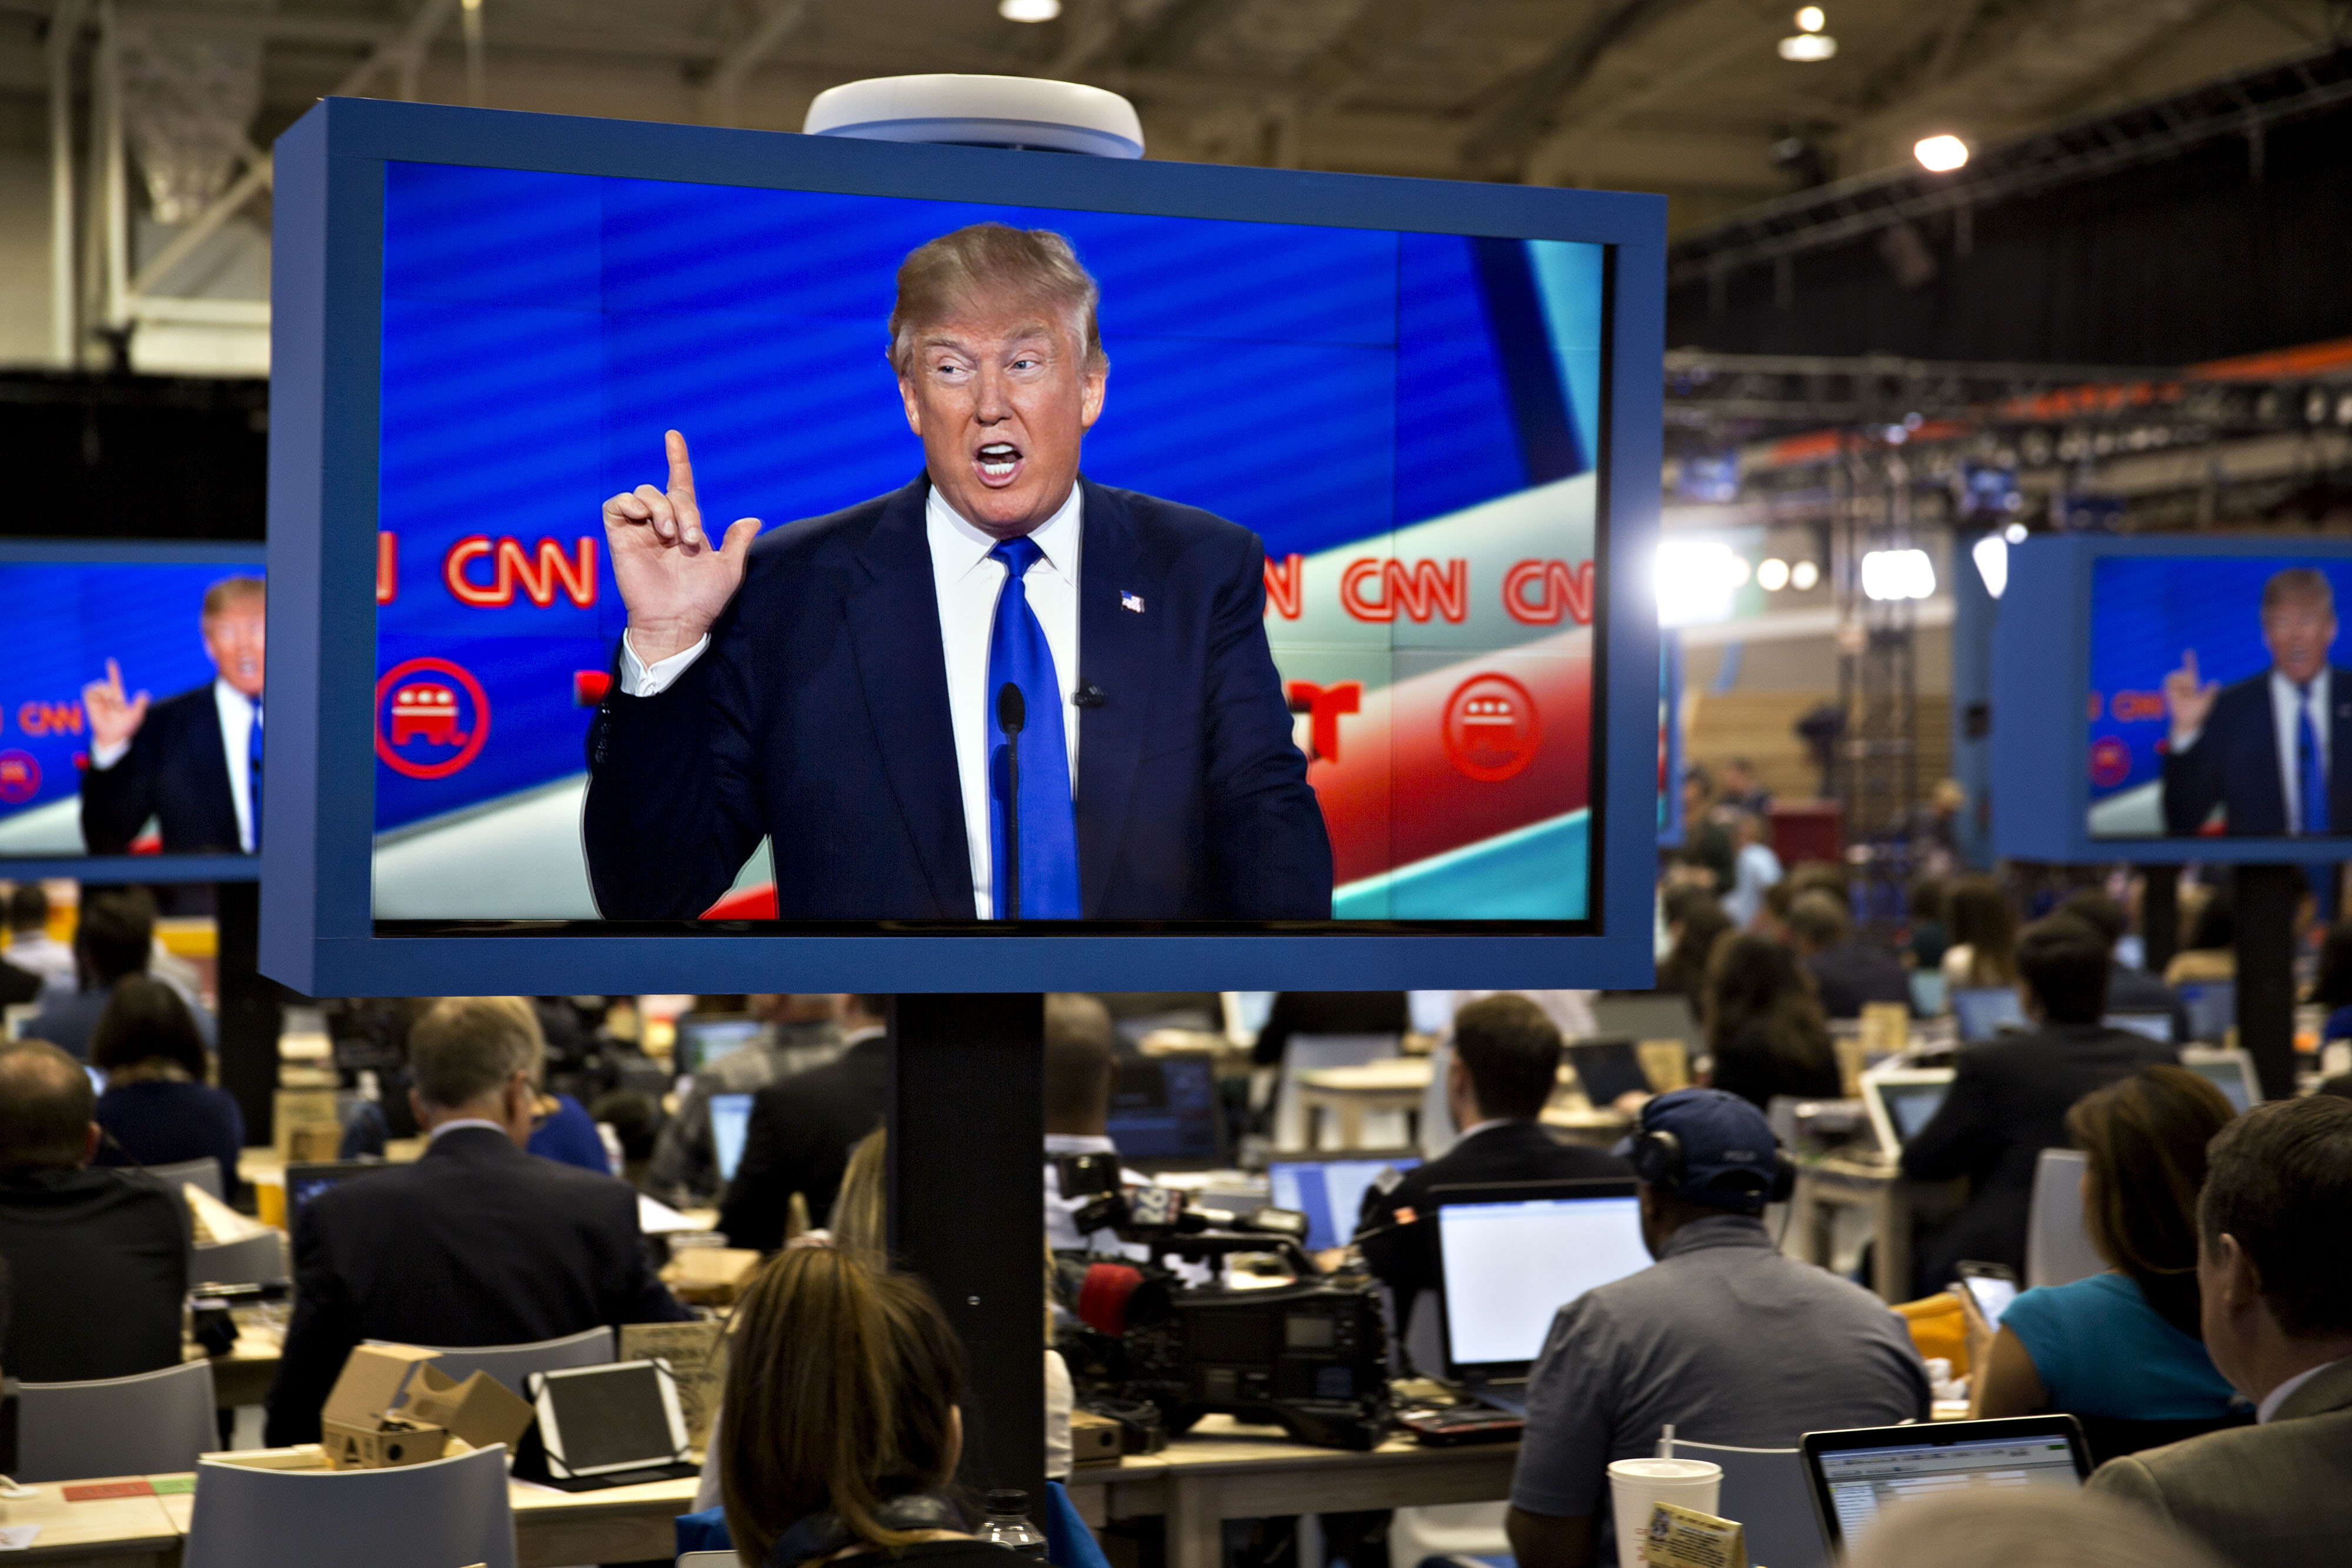 Donald Trump is seen speaking on a television screen in the filing center during the Republican presidential primary candidate debate sponsored by CNN and Telemundo at the University of Houston in Houston on  Feb. 25, 2016.